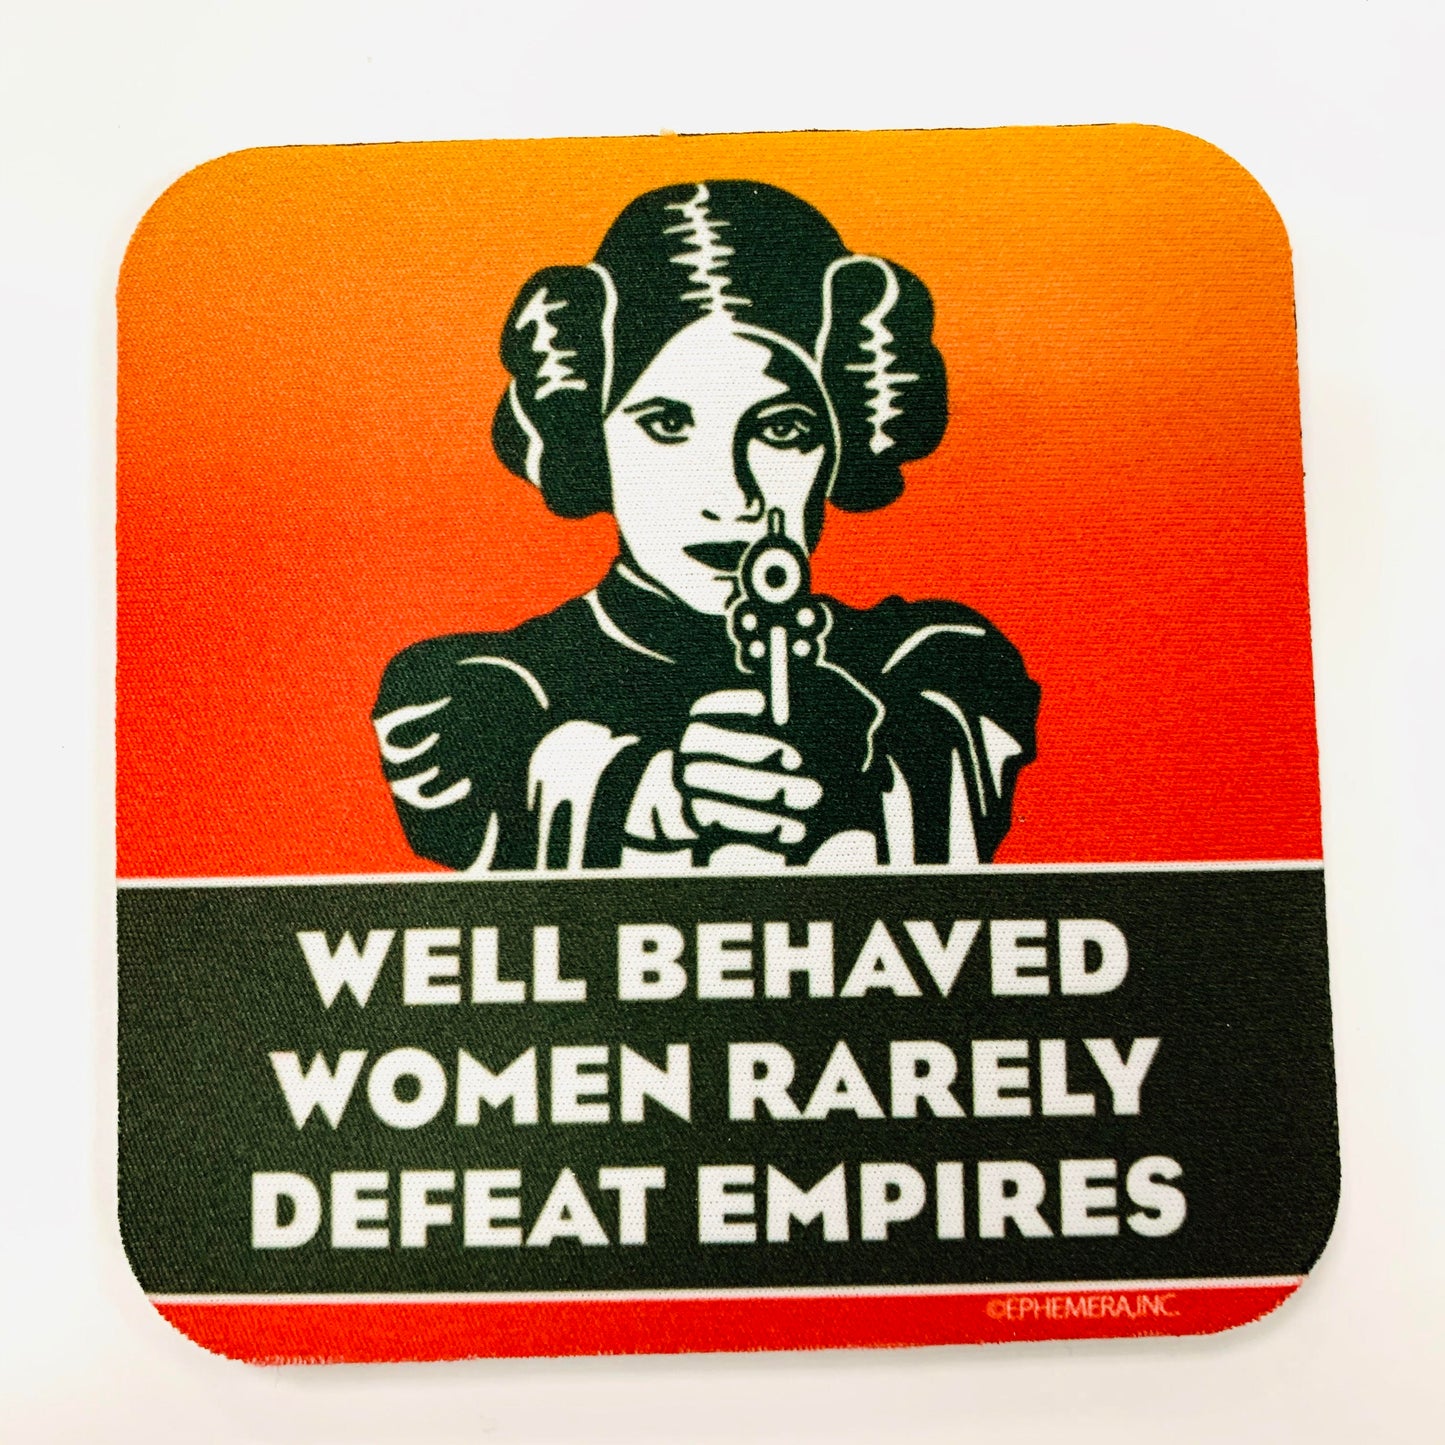 Well Behaved Women Rarely Defeat Empires Princess Leia Coaster Star Wars